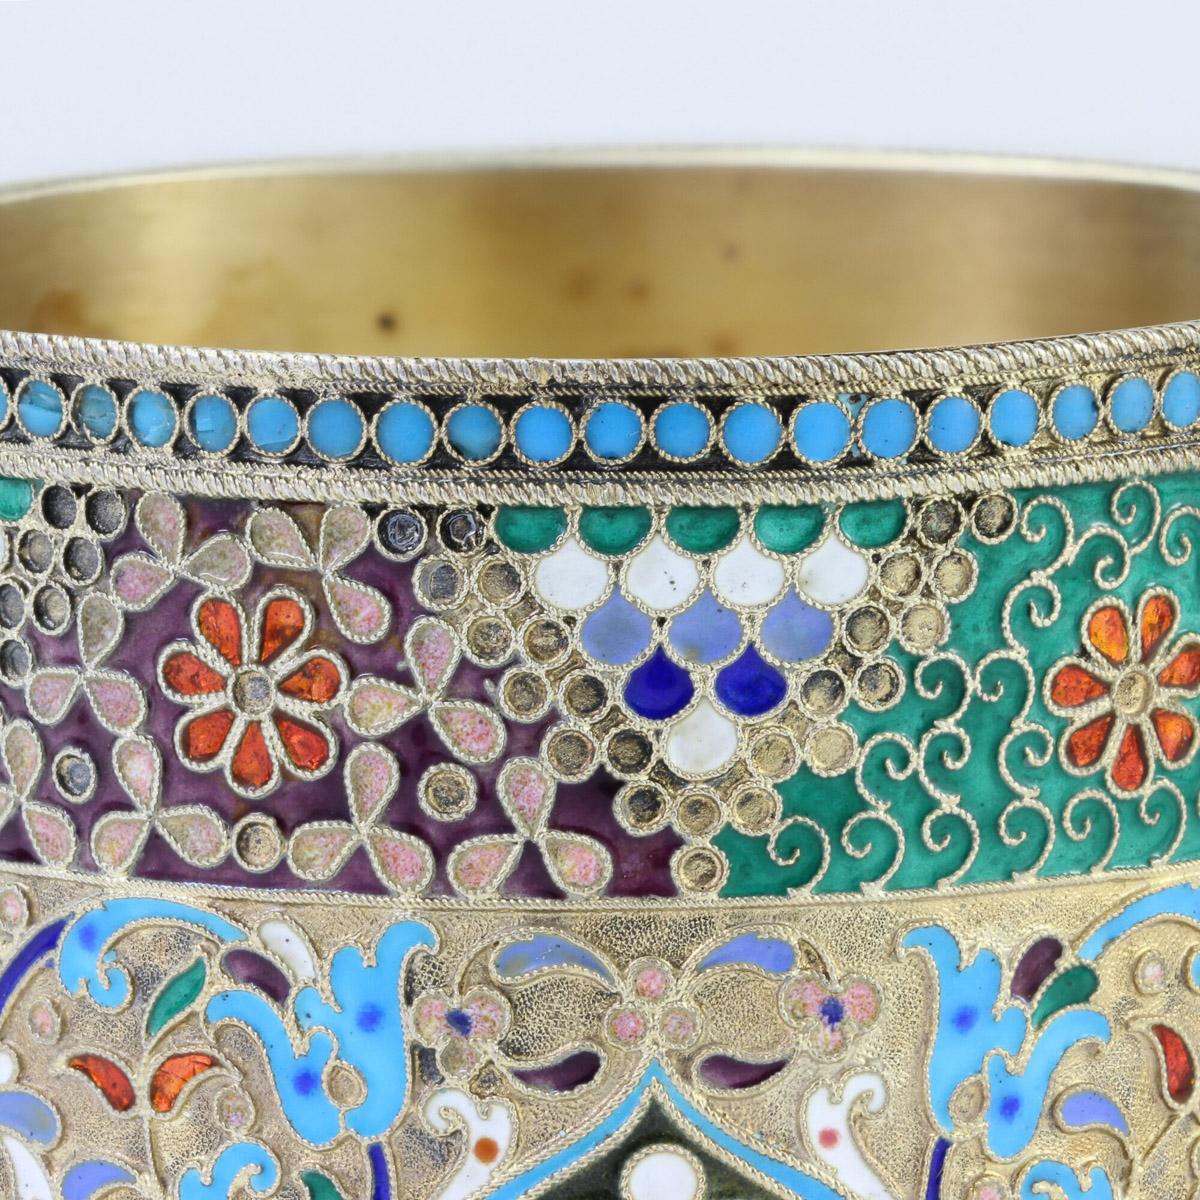 20th Century Imperial Russian Solid Silver-Gilt Enamel Tea Glass Holder, c.1900 9